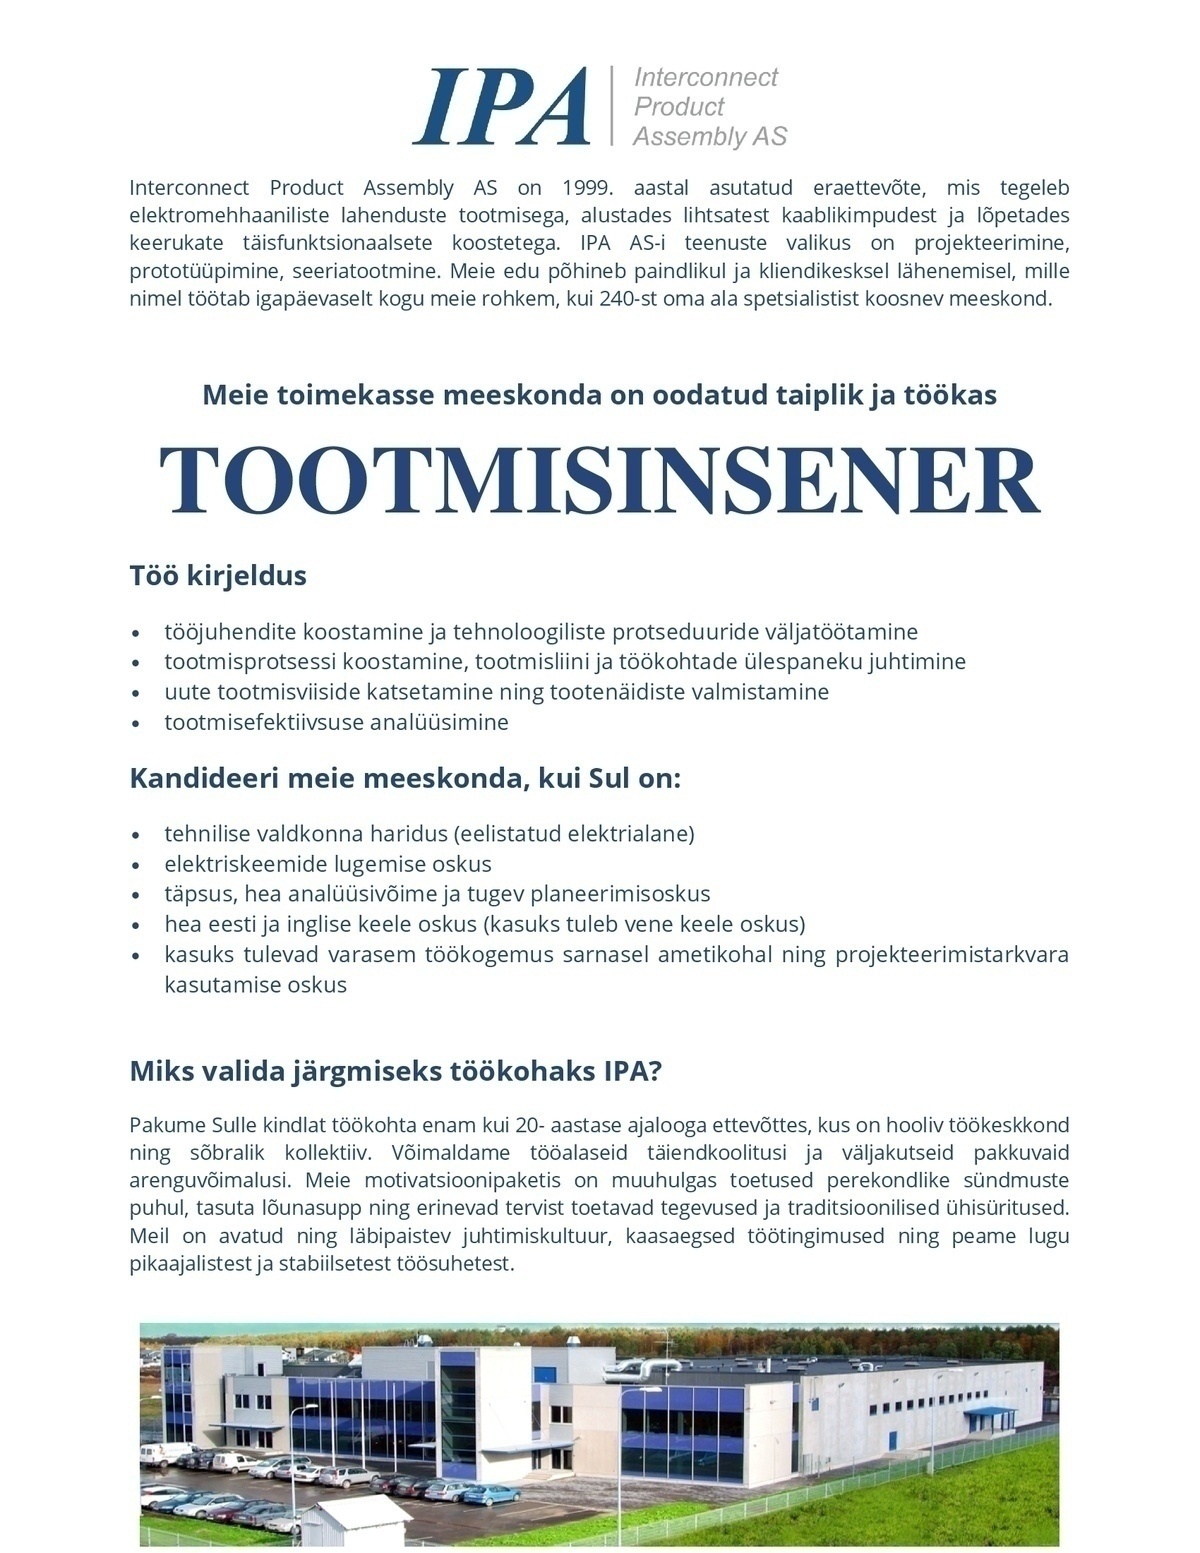 Interconnect Product Assembly AS Tootmisinsener